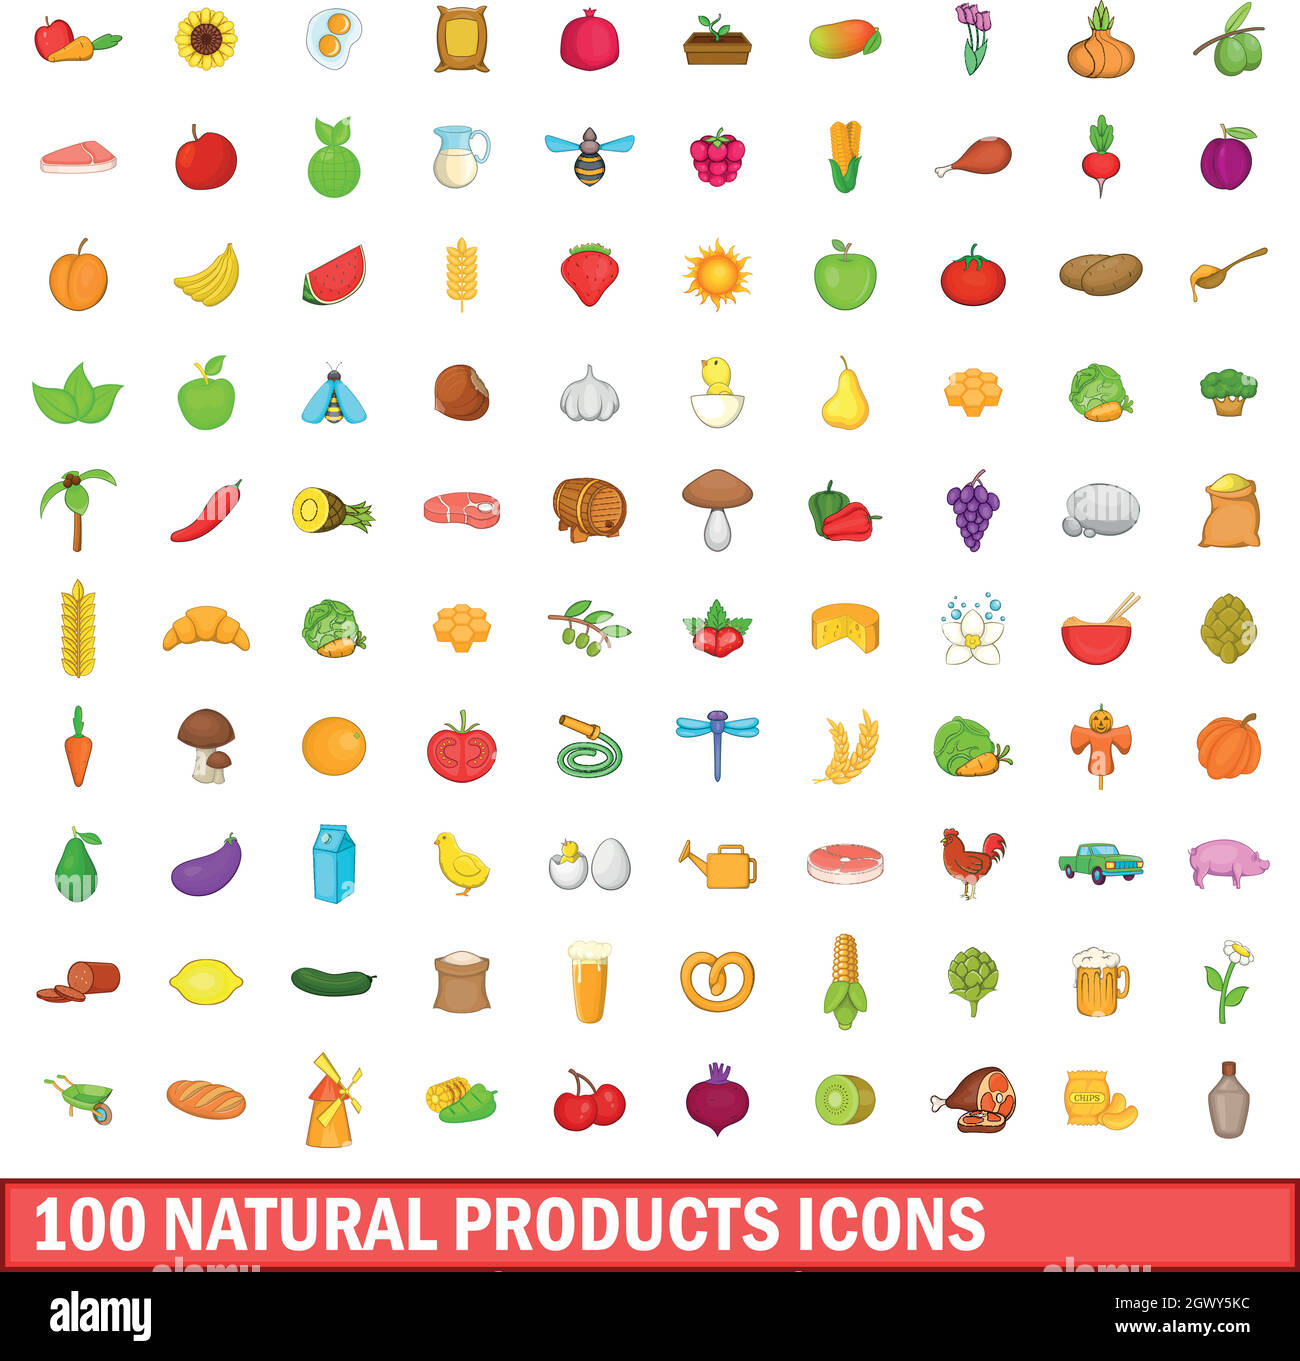 100 natural product icons set, cartoon style Stock Vector